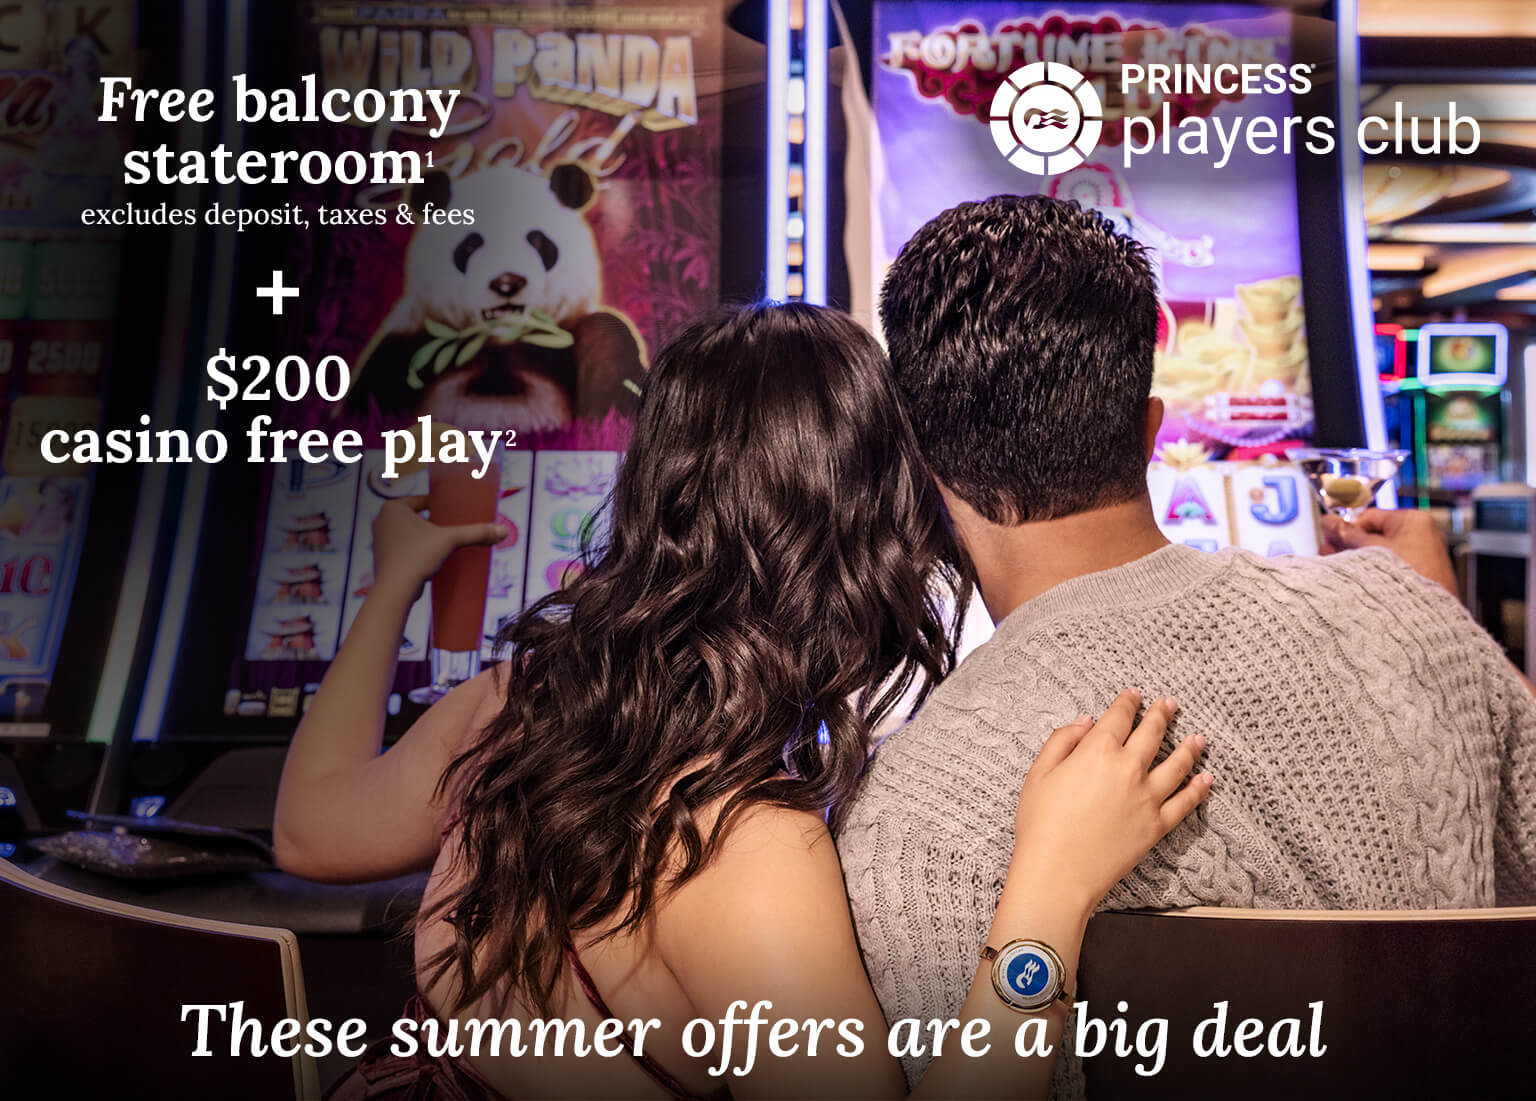 free balcony stateroom + $200 casino free play. Click here to book.